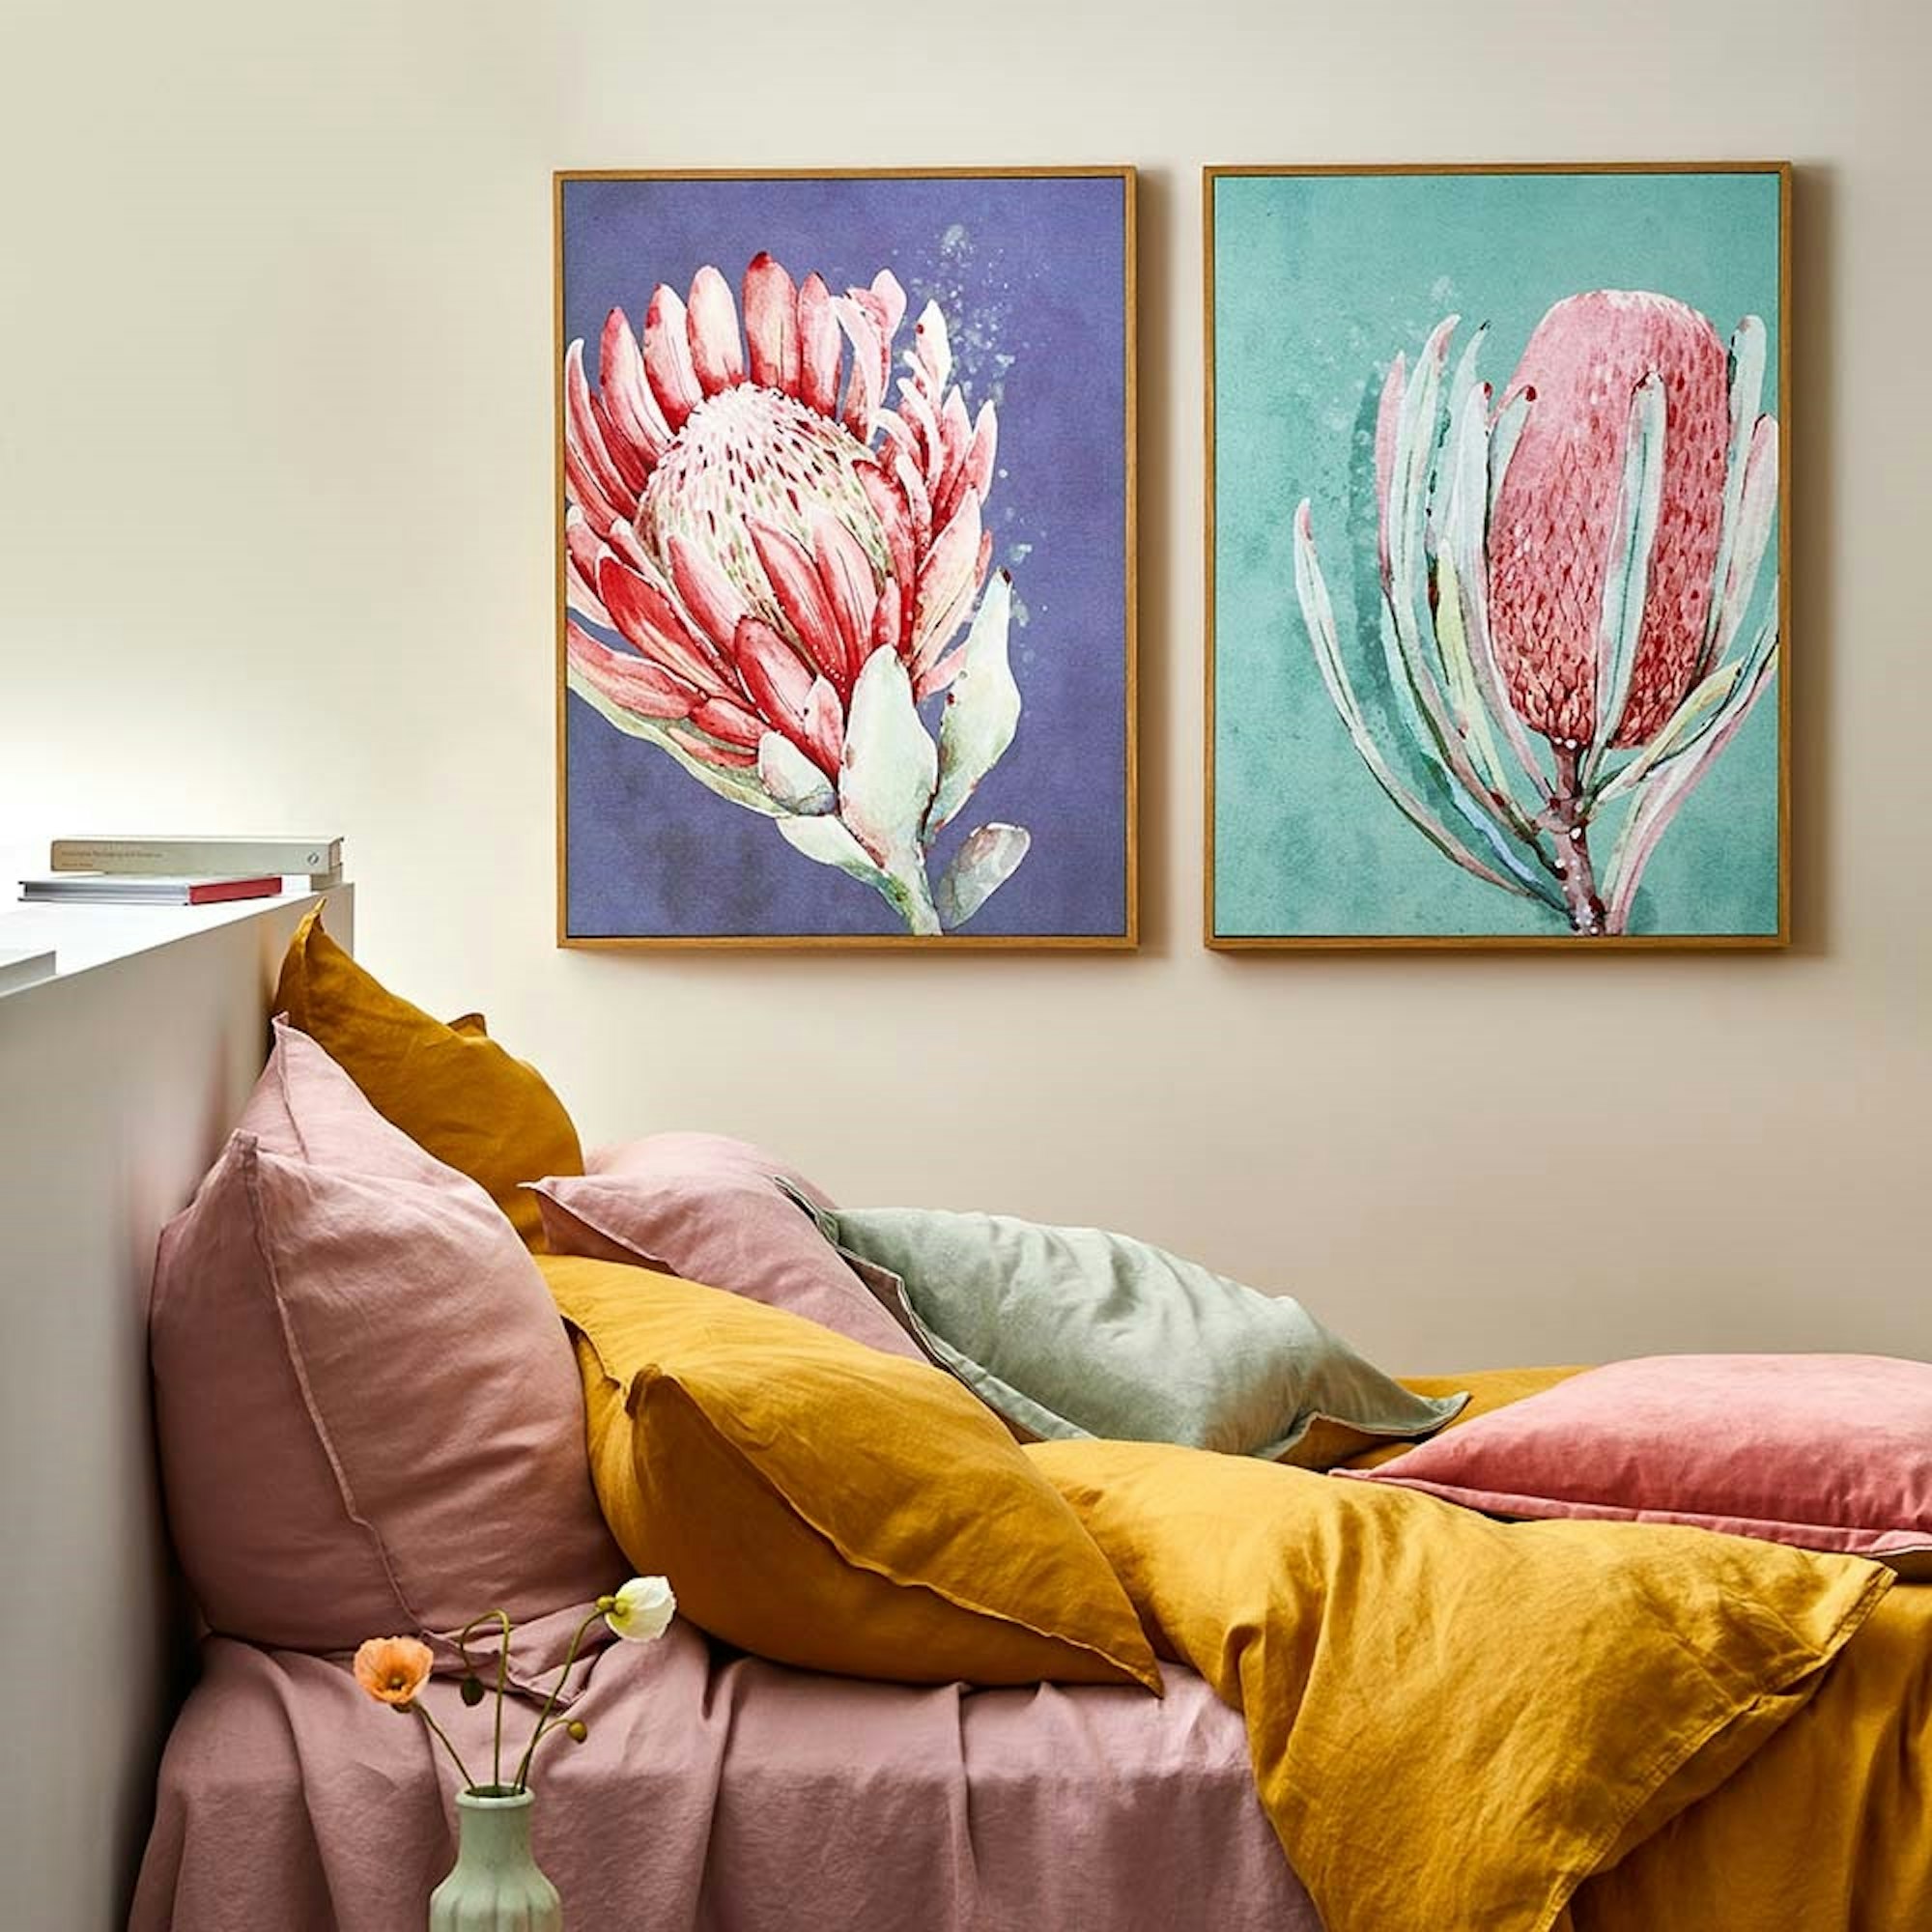 MyHouse colourful bedroom setting with native floral wall art